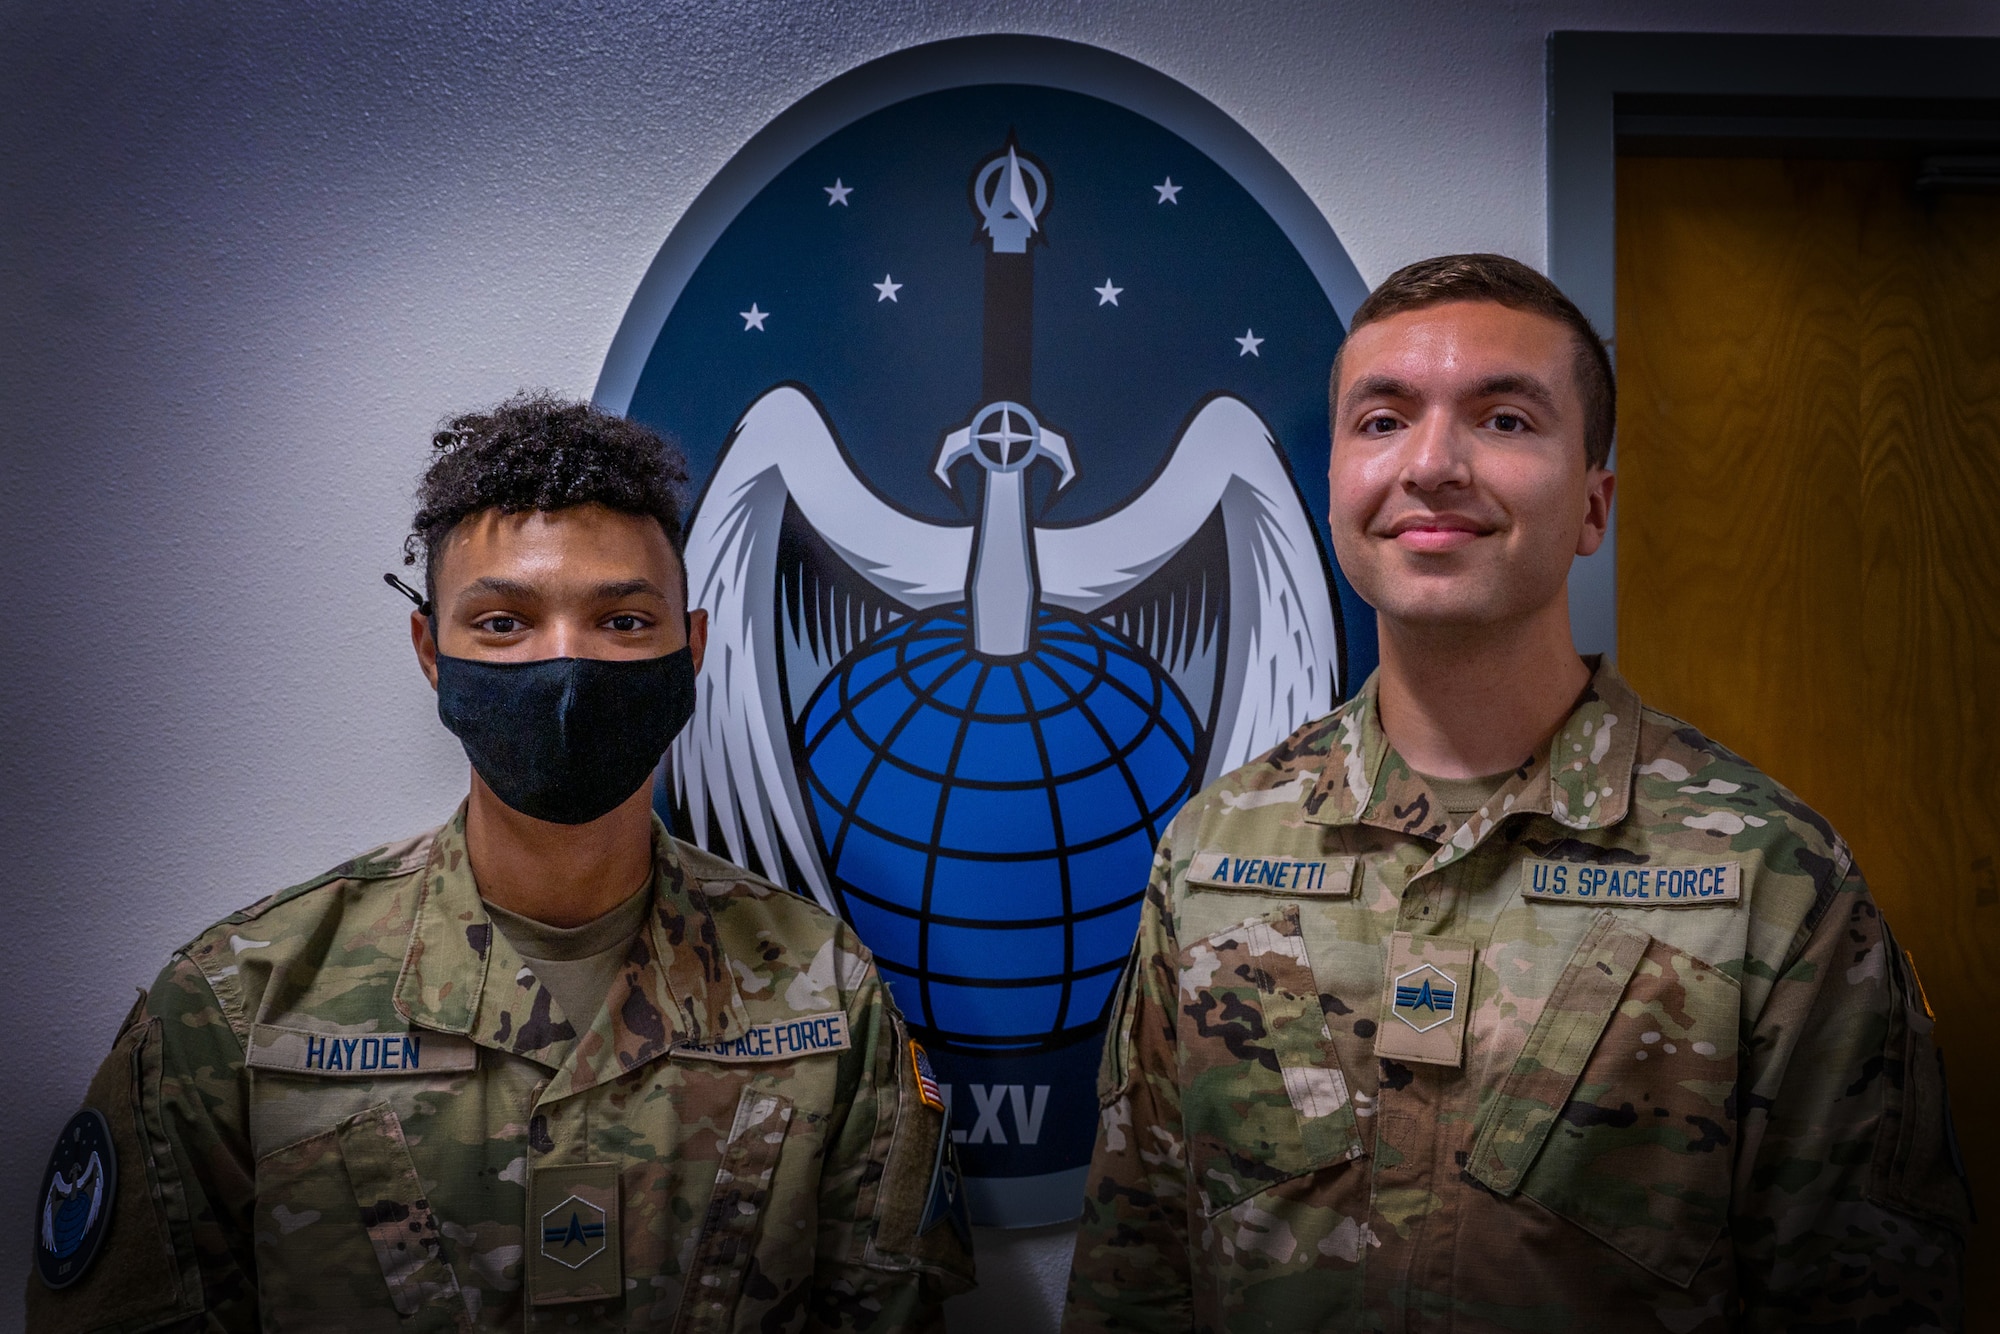 Spec. 3 Jesse Hayden, left, and Spec. 4 Derek Avenetti, both 65th Cyberspace Squadron cyber operators, stand in front of their unit’s emblem at Vandenberg Space Force Base, Calif., Sept. 9, 2022. Hayden and Avenetti performed life-saving treatment to a military member Aug. 16, 2022, during a physical training test. (U.S. Space Force photo by Tech. Sgt. Luke Kitterman)